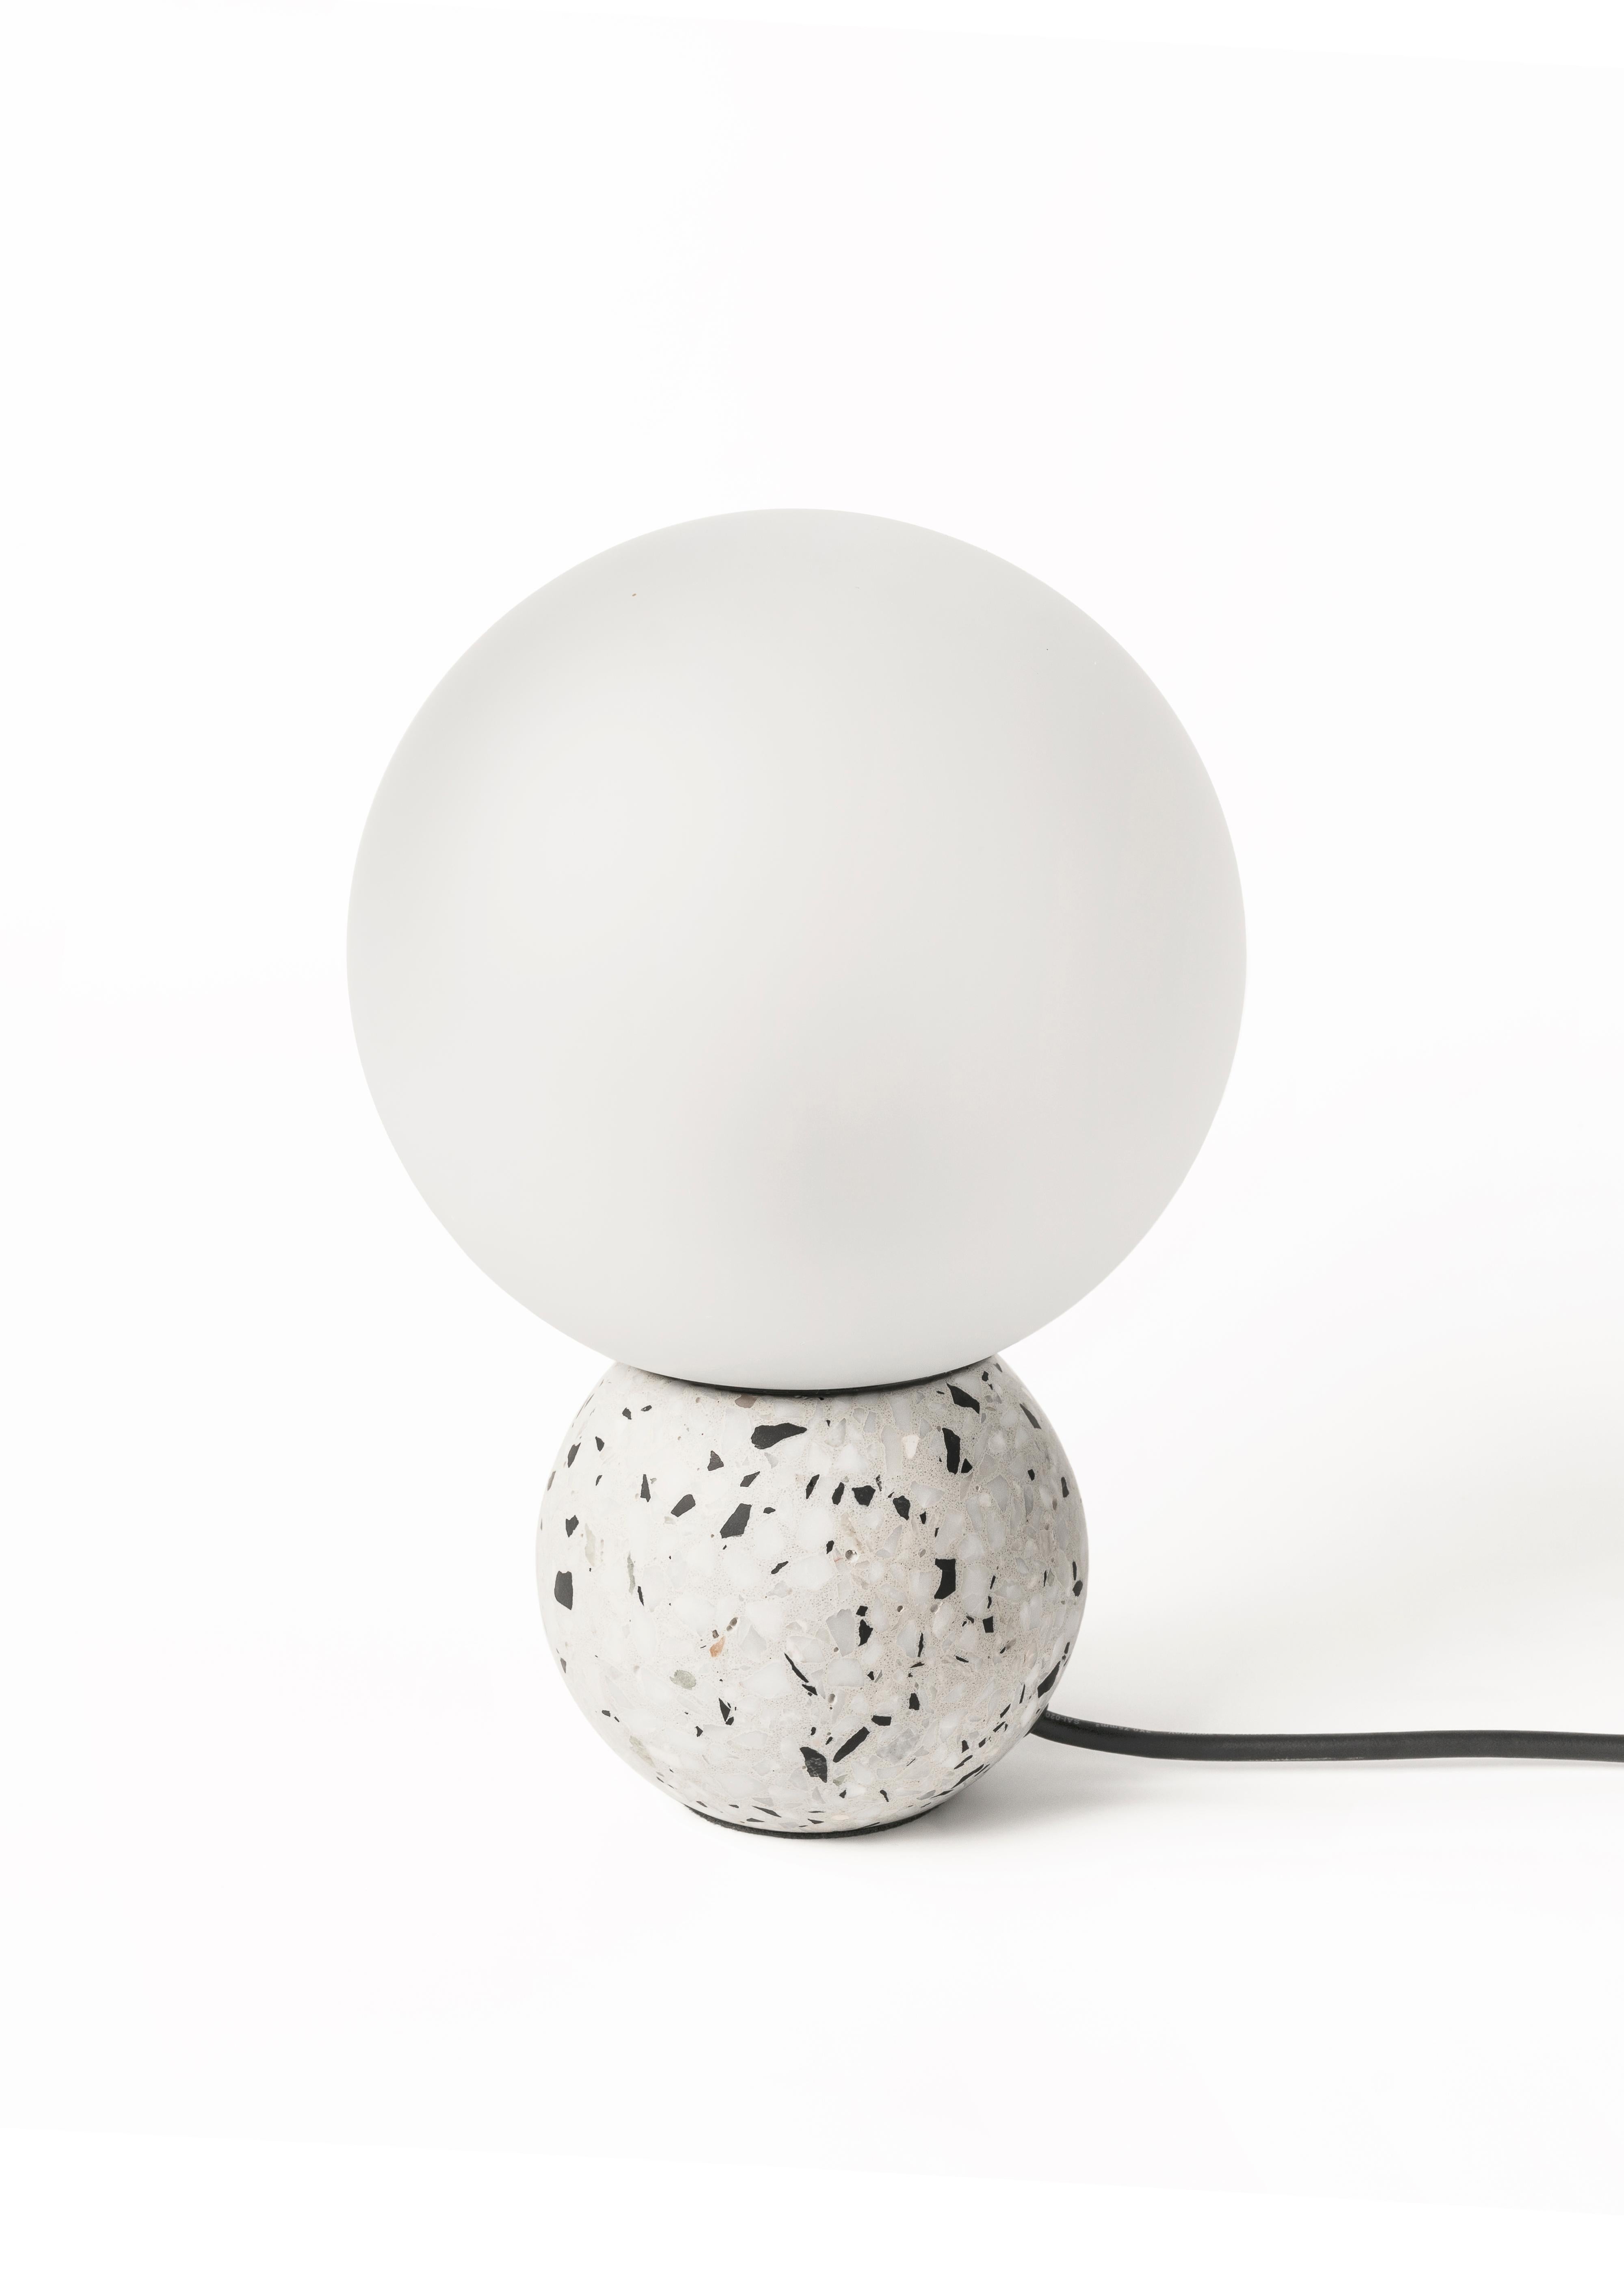 '8' table lamp in terrazzo (Black / White)

Measures: Ø20 cm × H 29.5 cm

Bulb: E27 LED 3W 100-240V 80Ra 200LM 3000K - Comptable with US electric system.

Bentu Design furniture and lightings derive its uniqueness from the simplicity of its forms